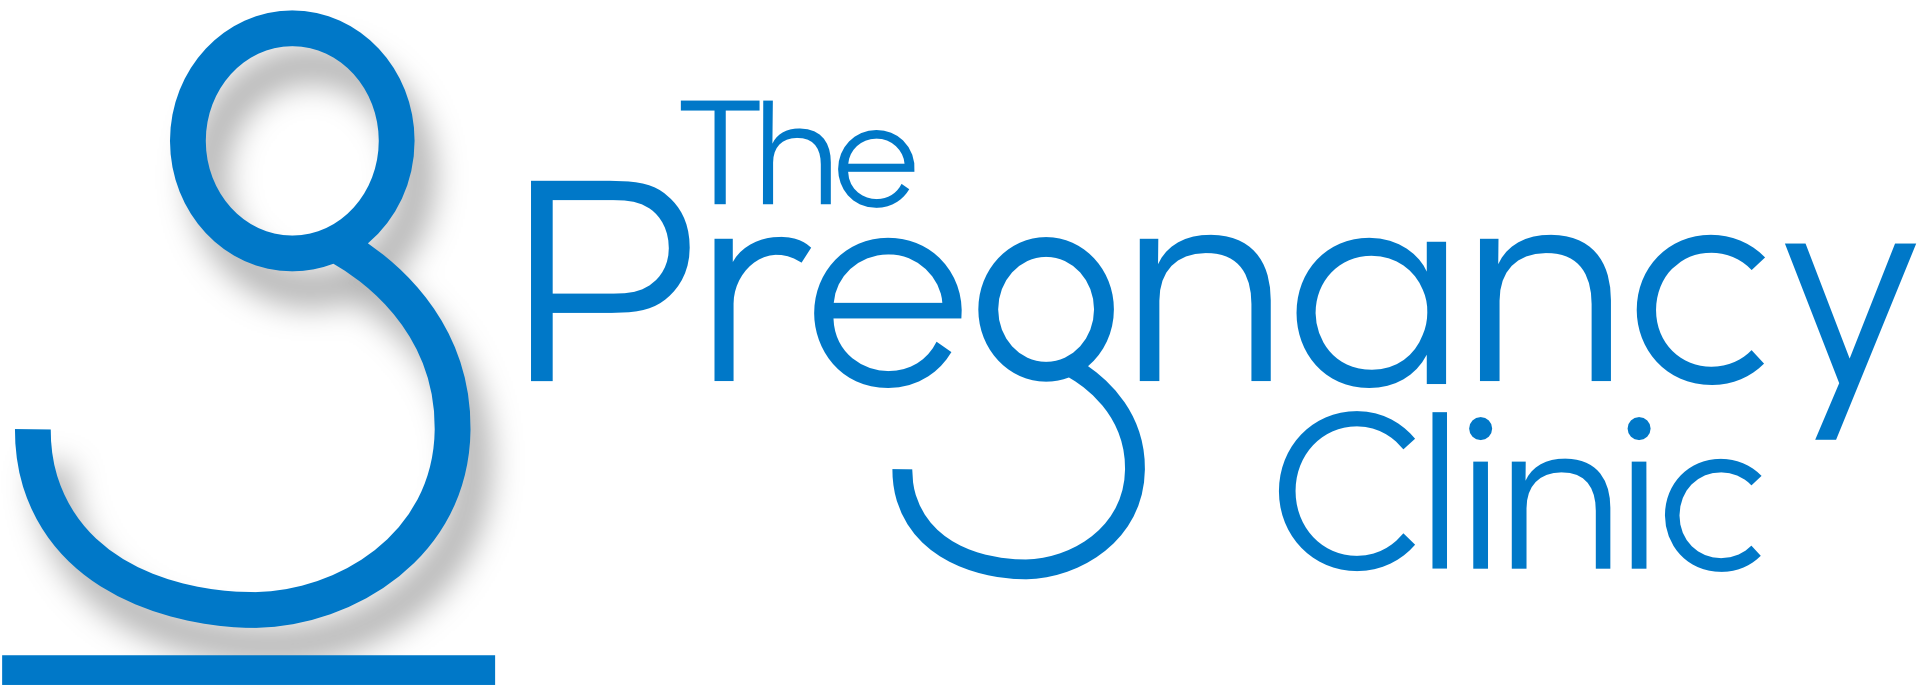 The Pregnancy Clinic